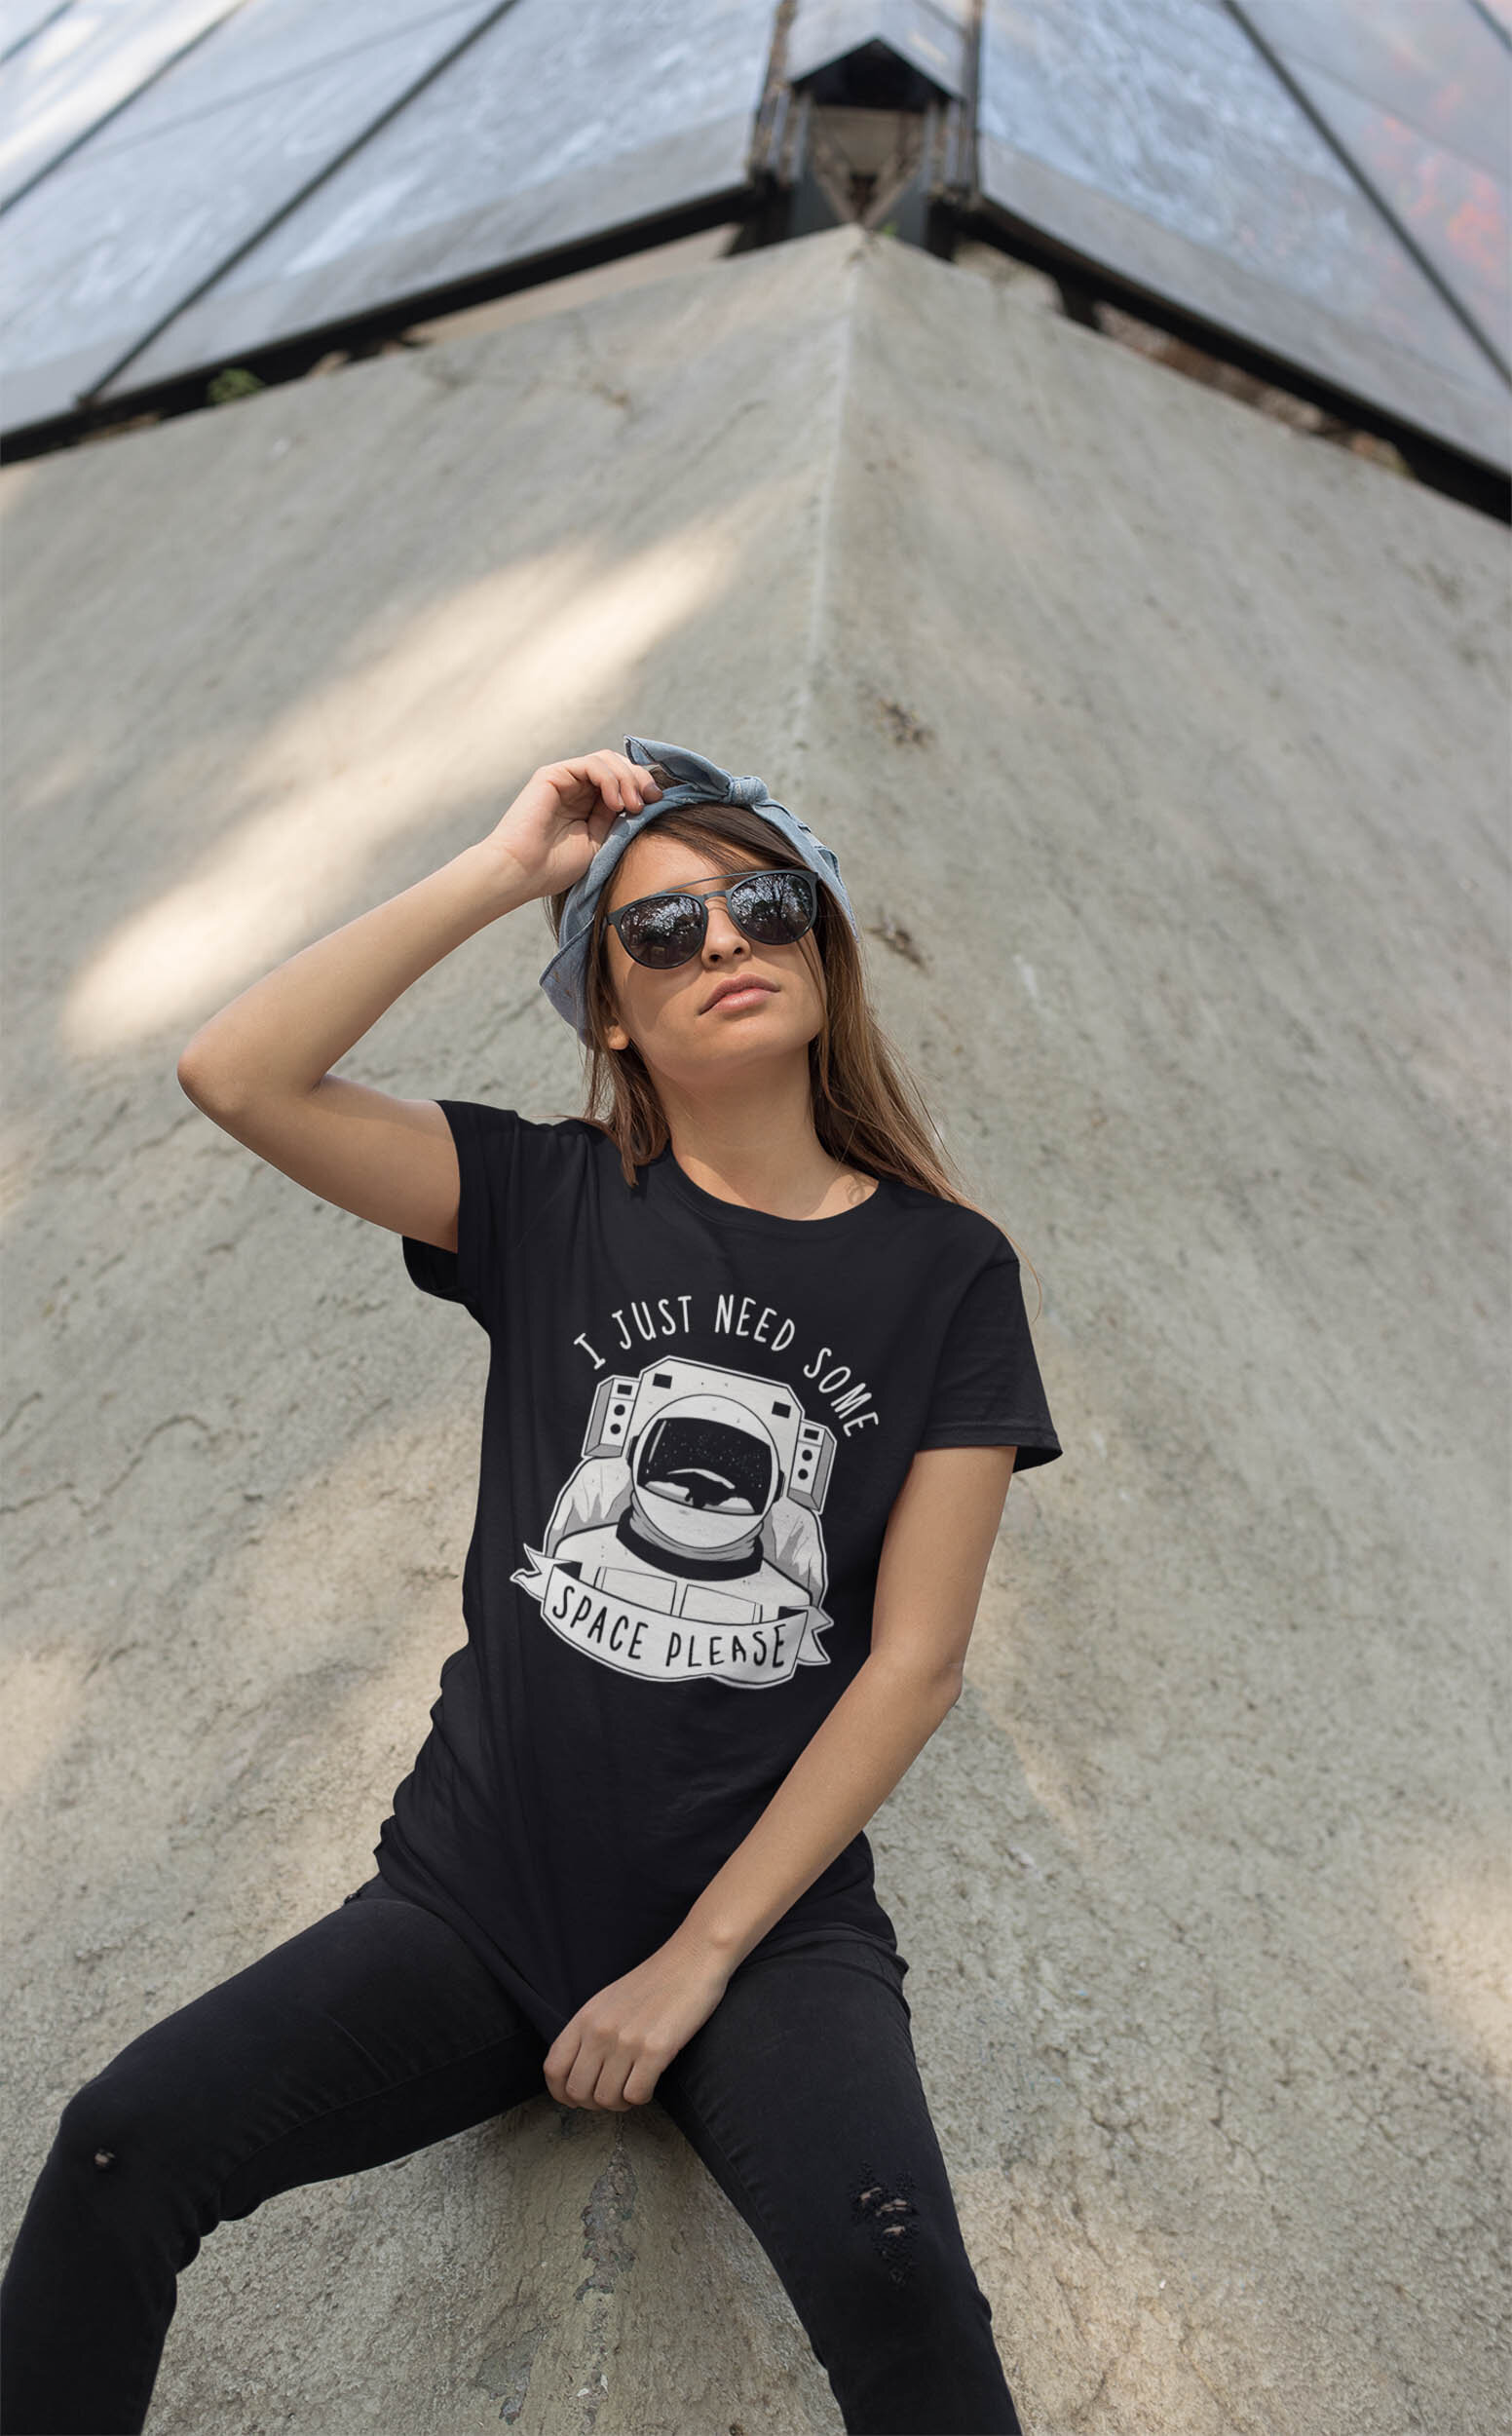 t-shirt-mockup-of-a-trendy-woman-with-sunglasses-leaning-over-a-concrete-structure-27340.jpg